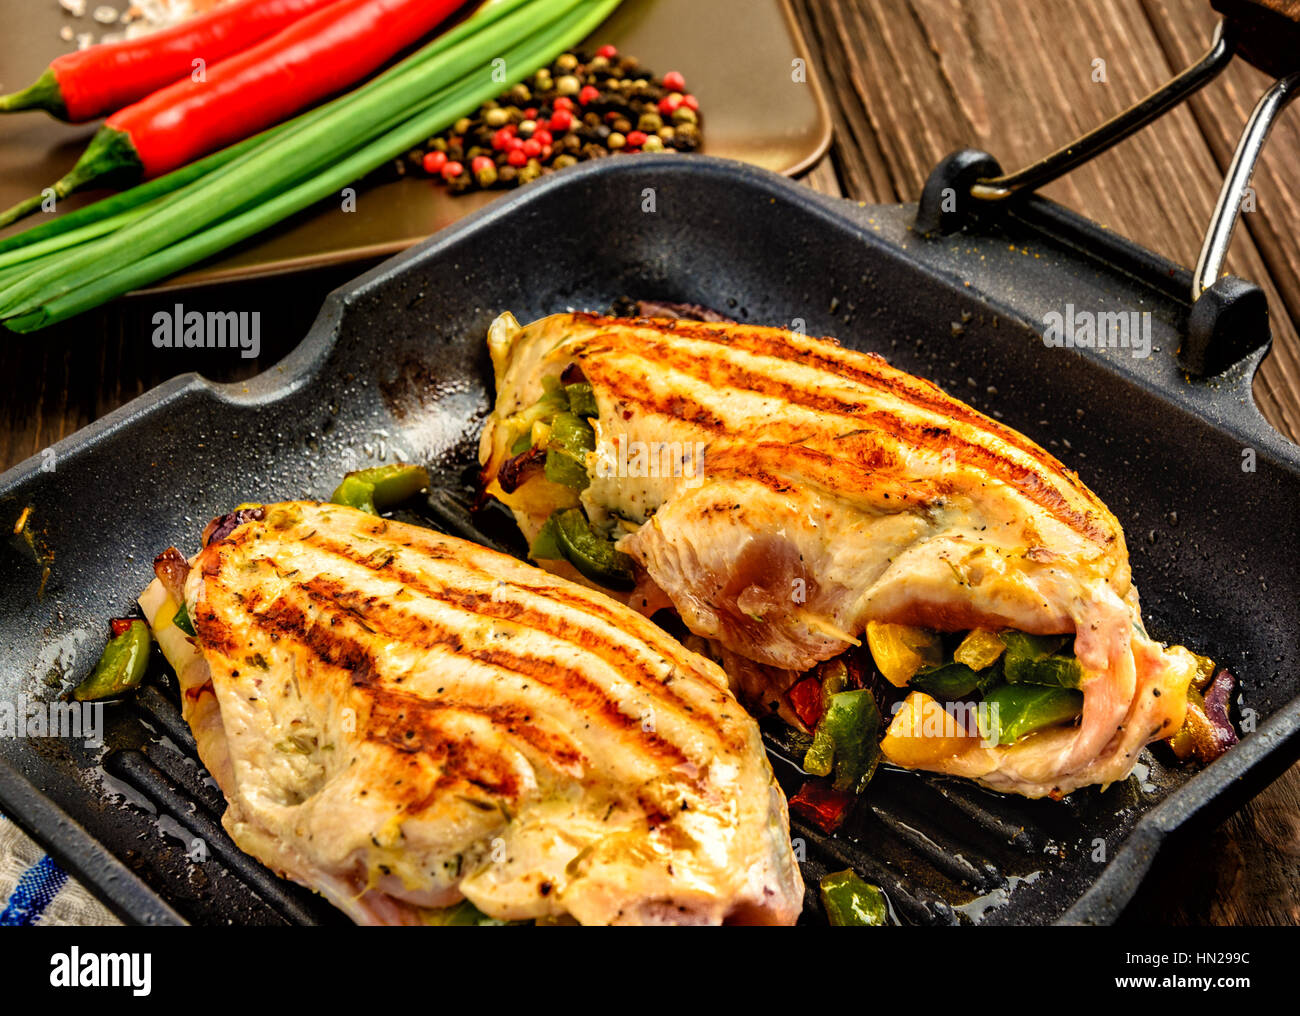 Juicy chicken fillet on a frying pan grill on a brown wooden background. Close up Stock Photo